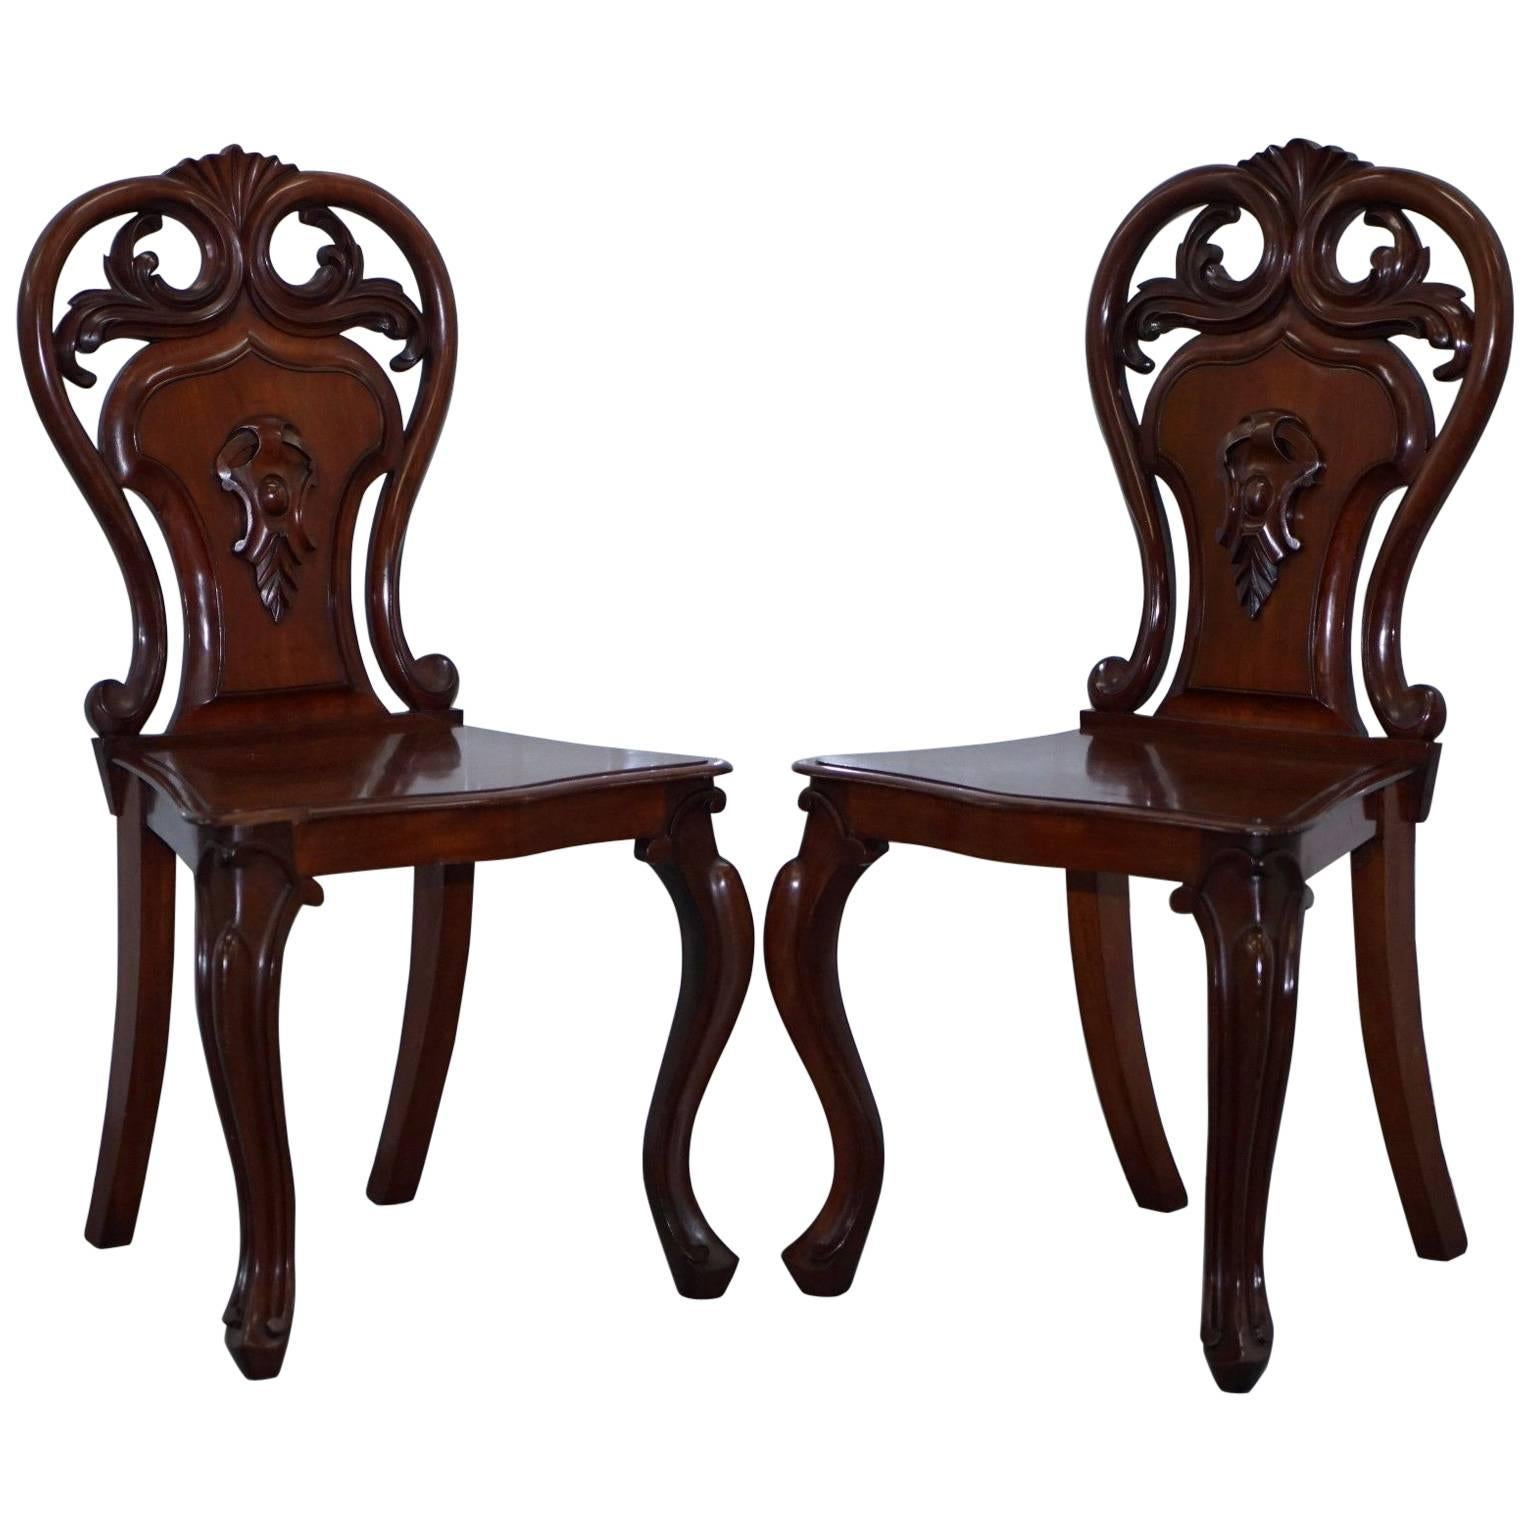 Pair of Rare 1870 Victorian Hand-Carved Shield Backed Solid Mahogany Hall Chairs